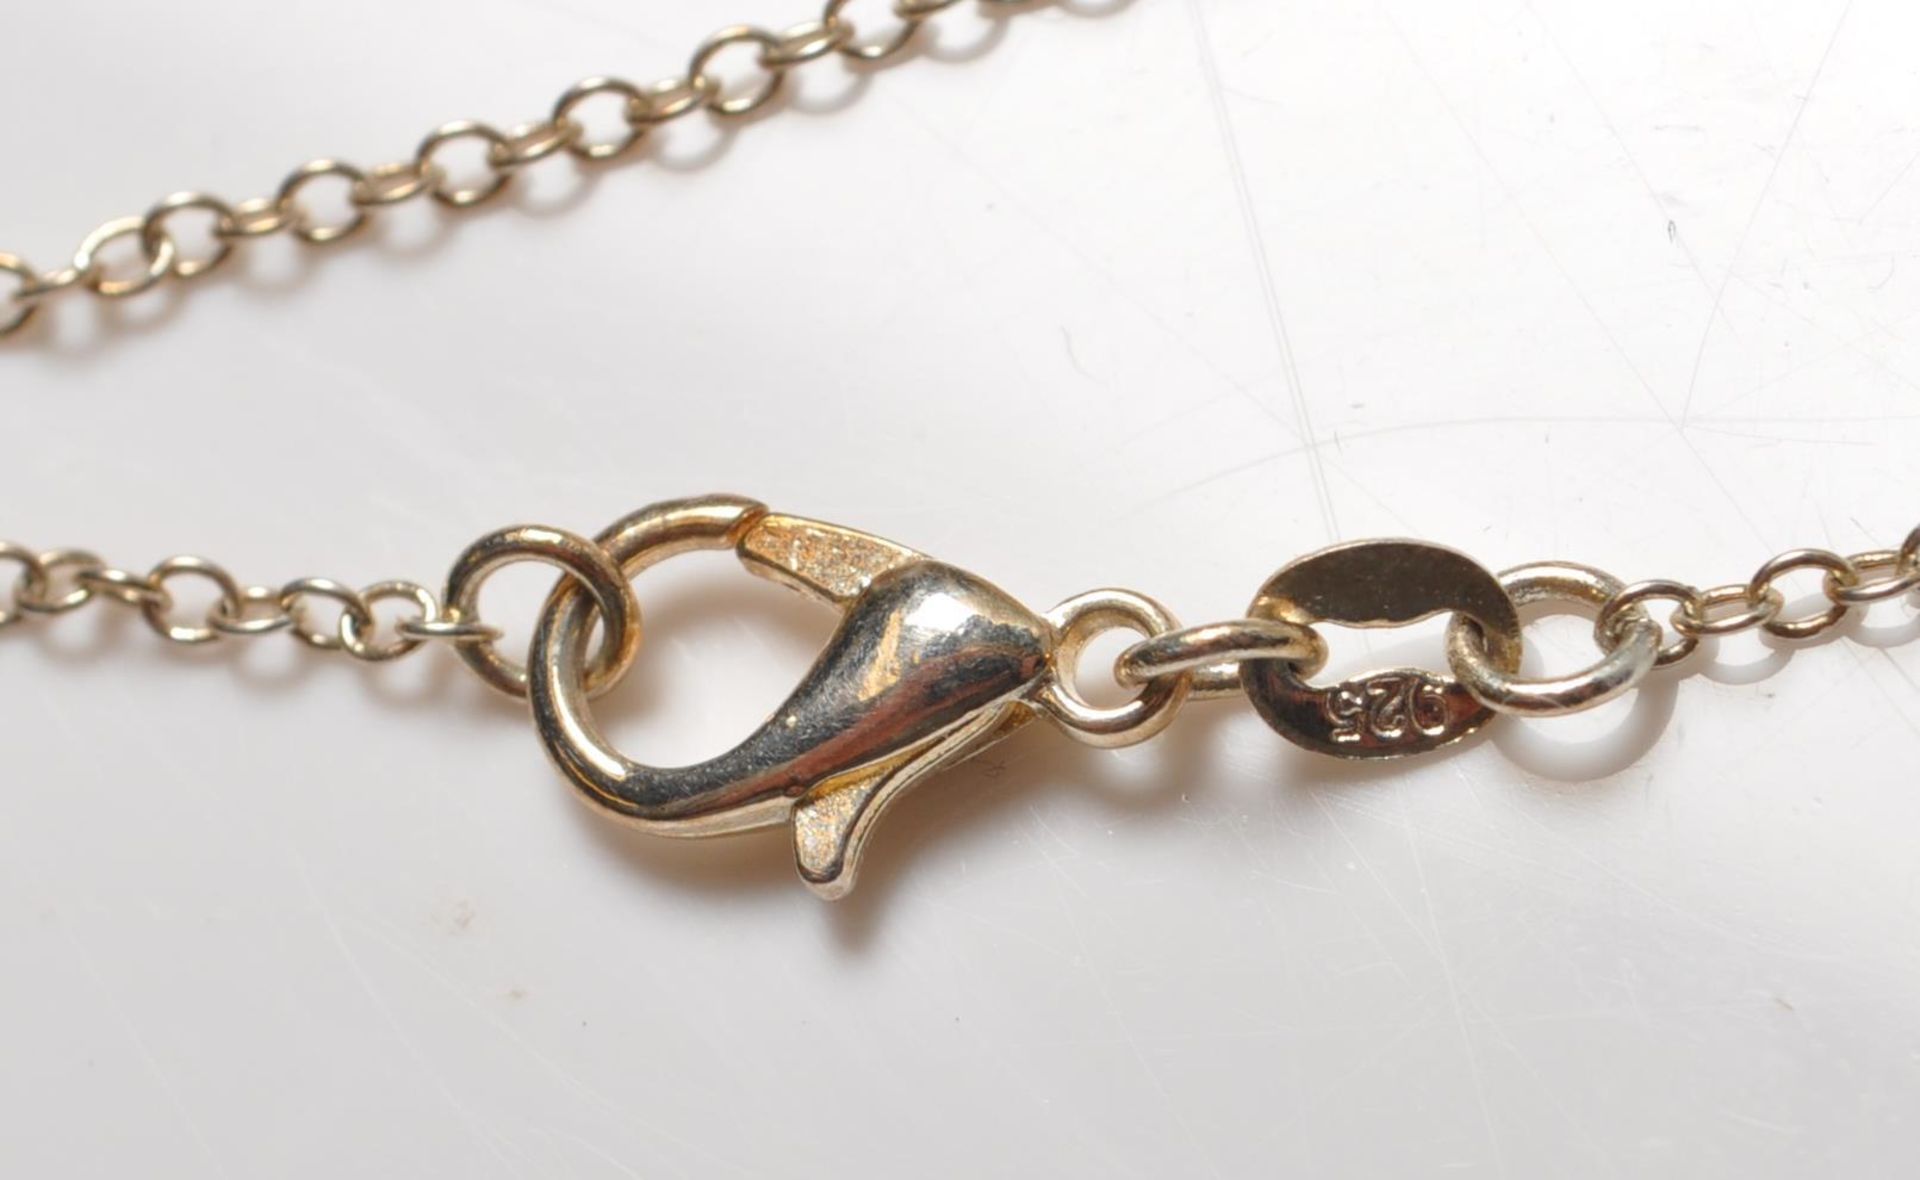 SILVER DUCK WHISTLE PENDANT NECKLACE - Image 9 of 9